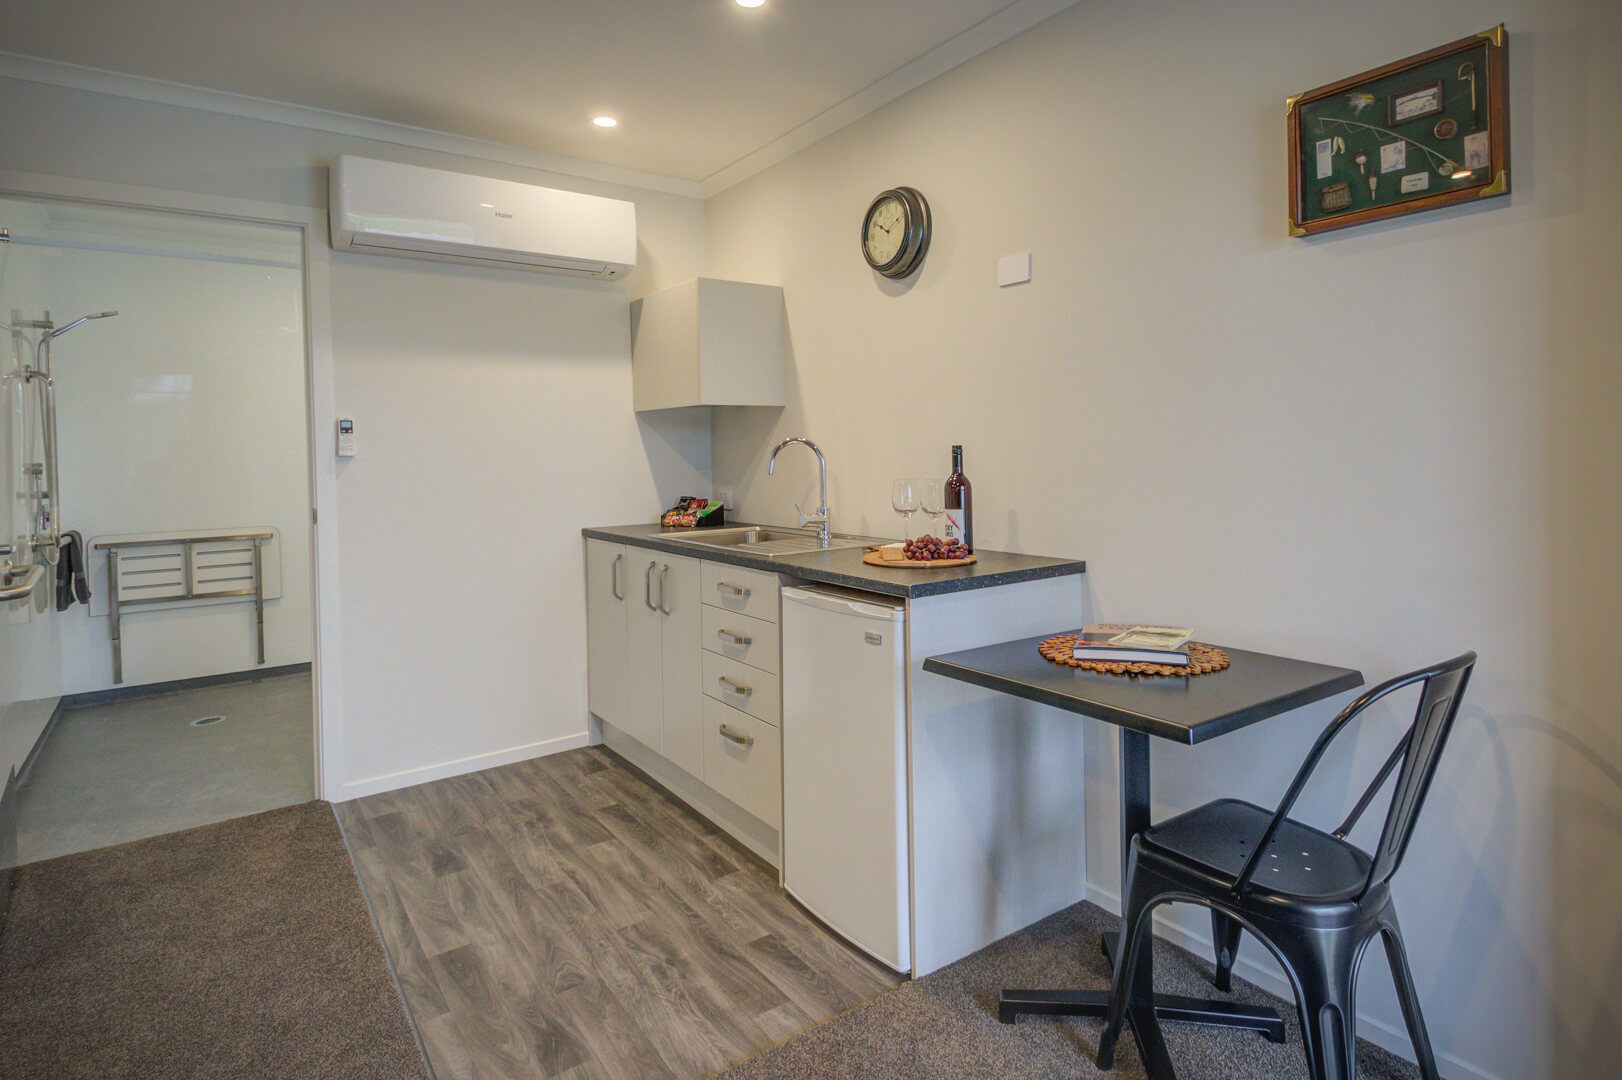 Kitchenette and dining area of one-bedroom accessible suite